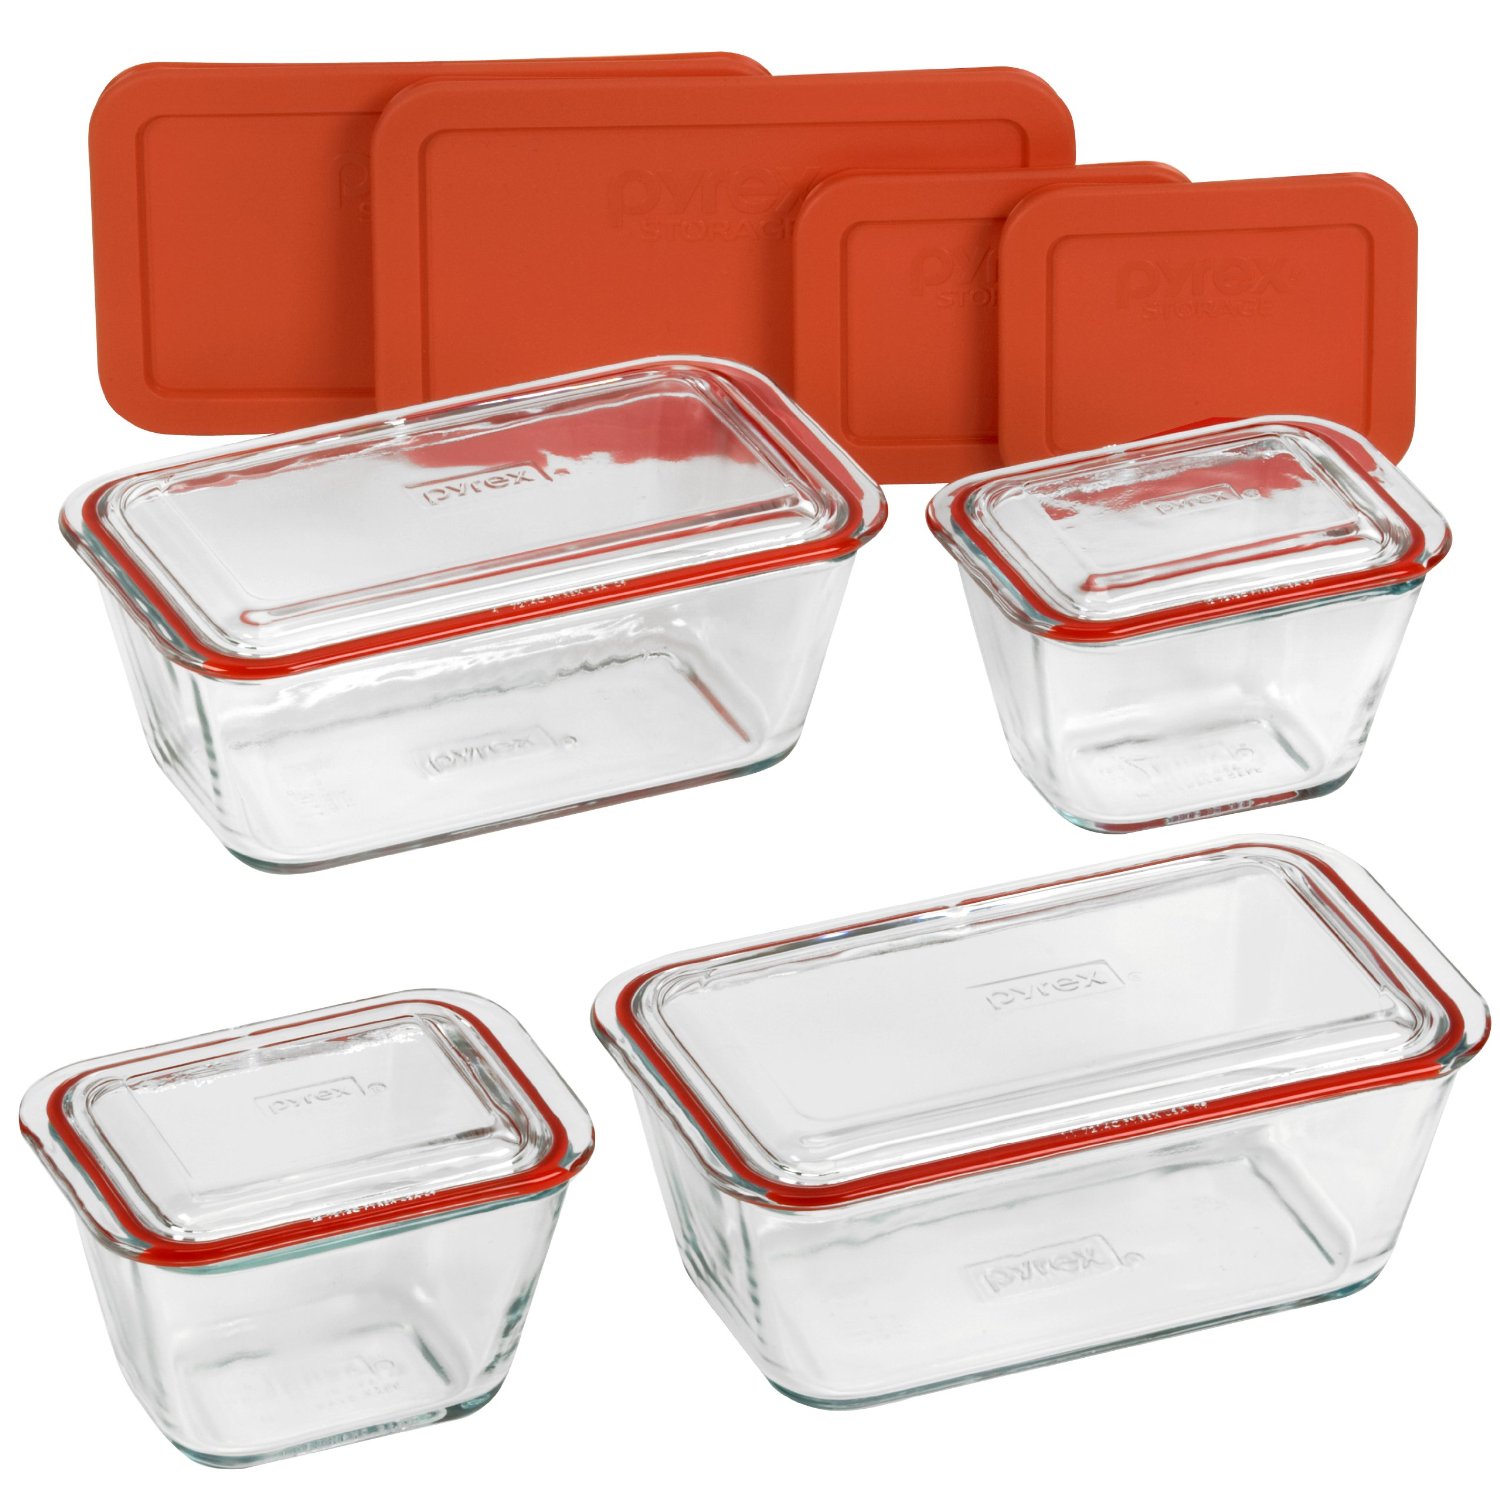 Pyrex Bake, Serve And Store Sets $23.64